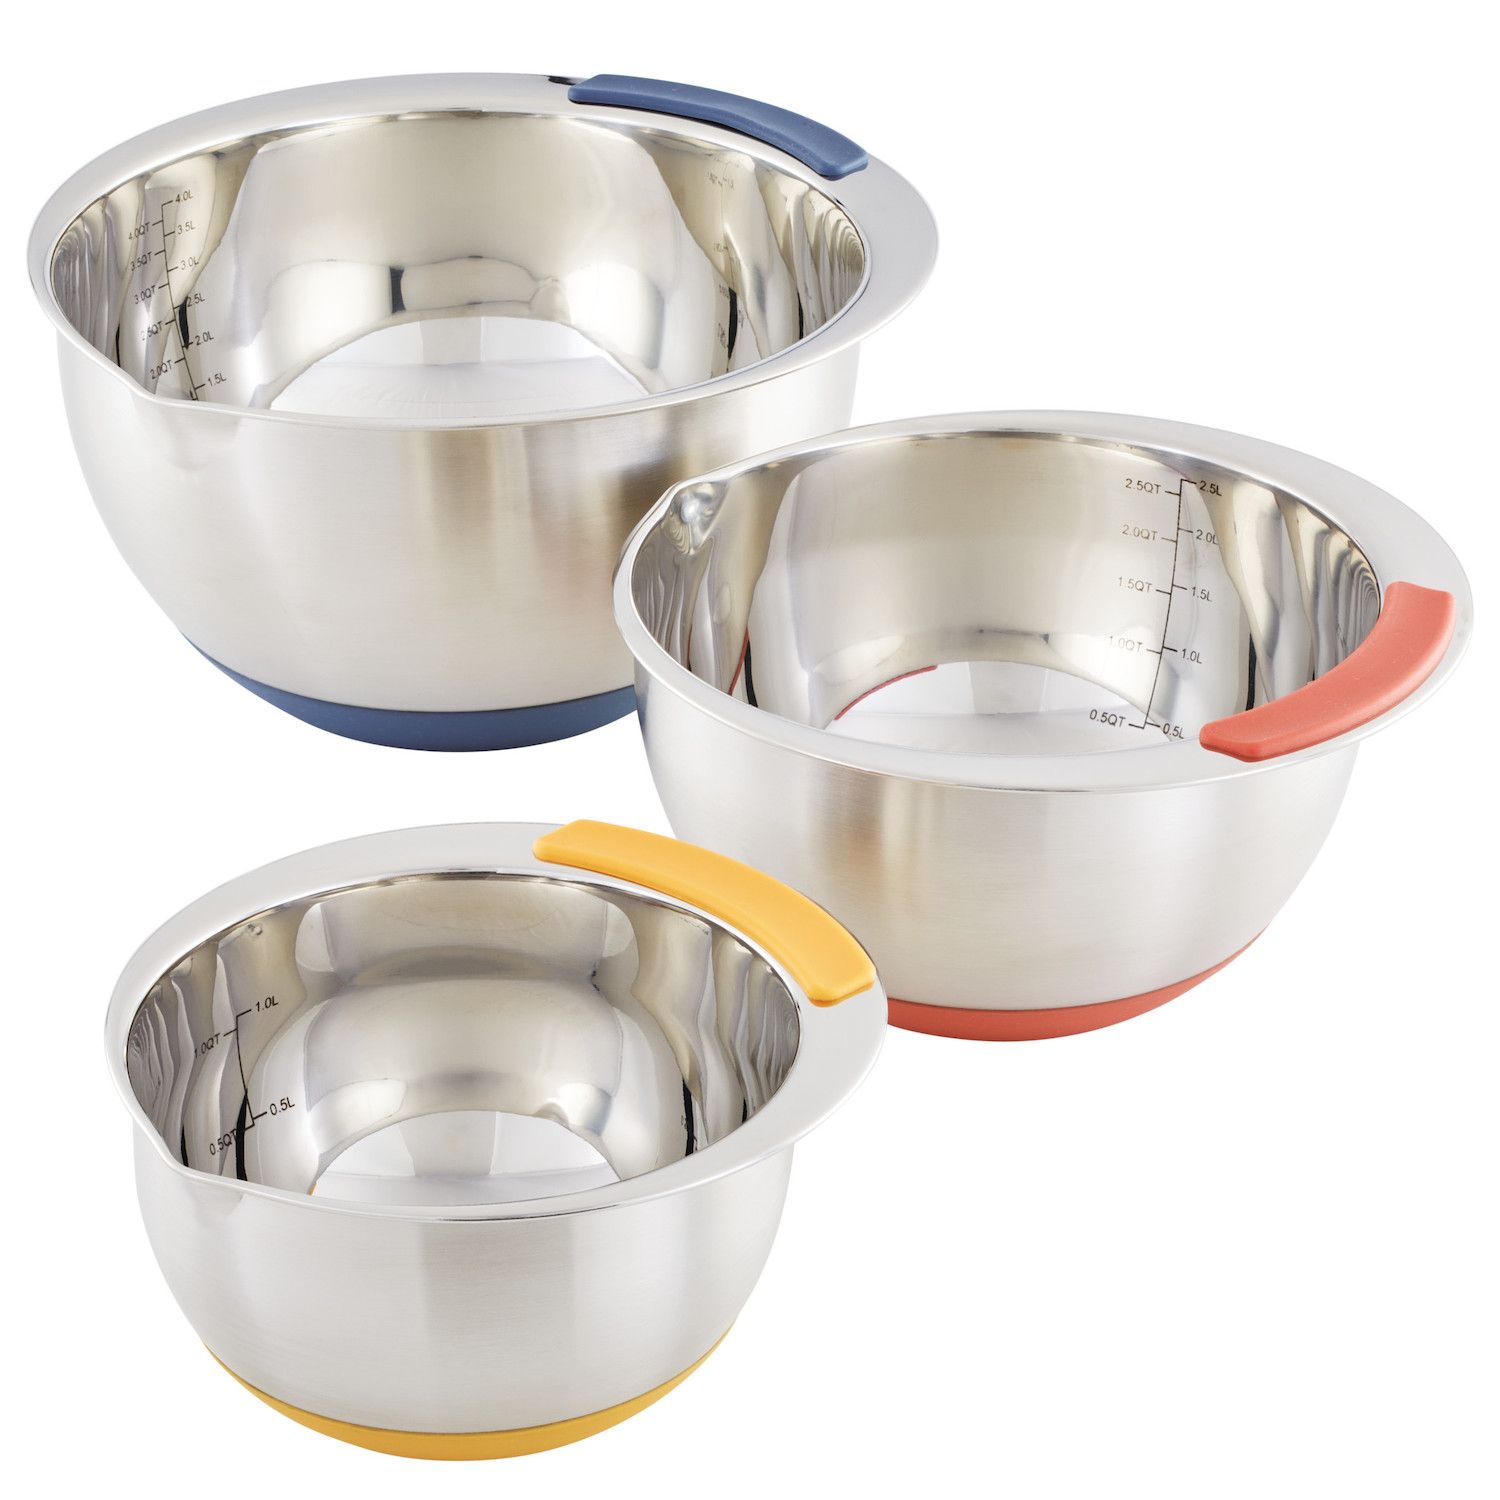 Chef Pomodoro Mixing Bowls with Lids, Stainless Steel Bowl Set, Non-Slip Silicone Base, Mixing Bowl Set - 3 Piece (1.5 qt, 3 qt, 5 qt), Bowls for